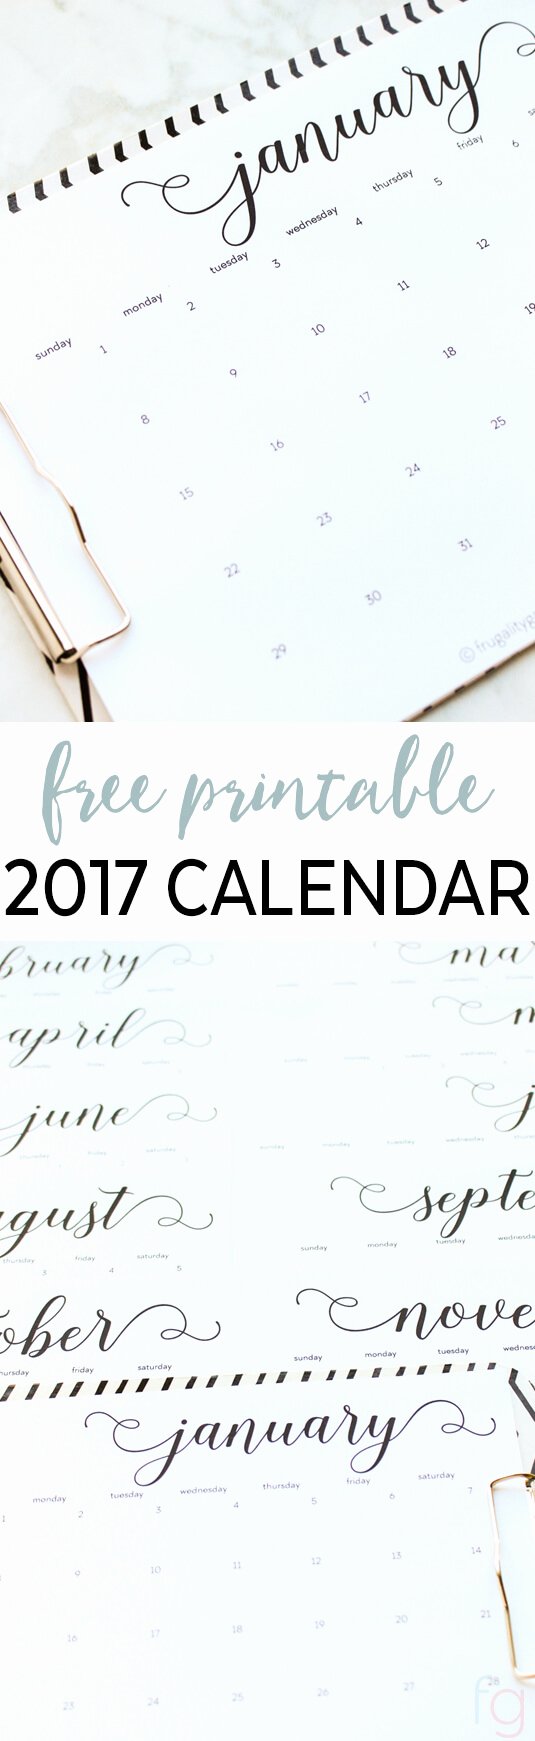 Monthly Budget Calendar Printable Unique Monthly Bud Planner Worksheet Free Printable